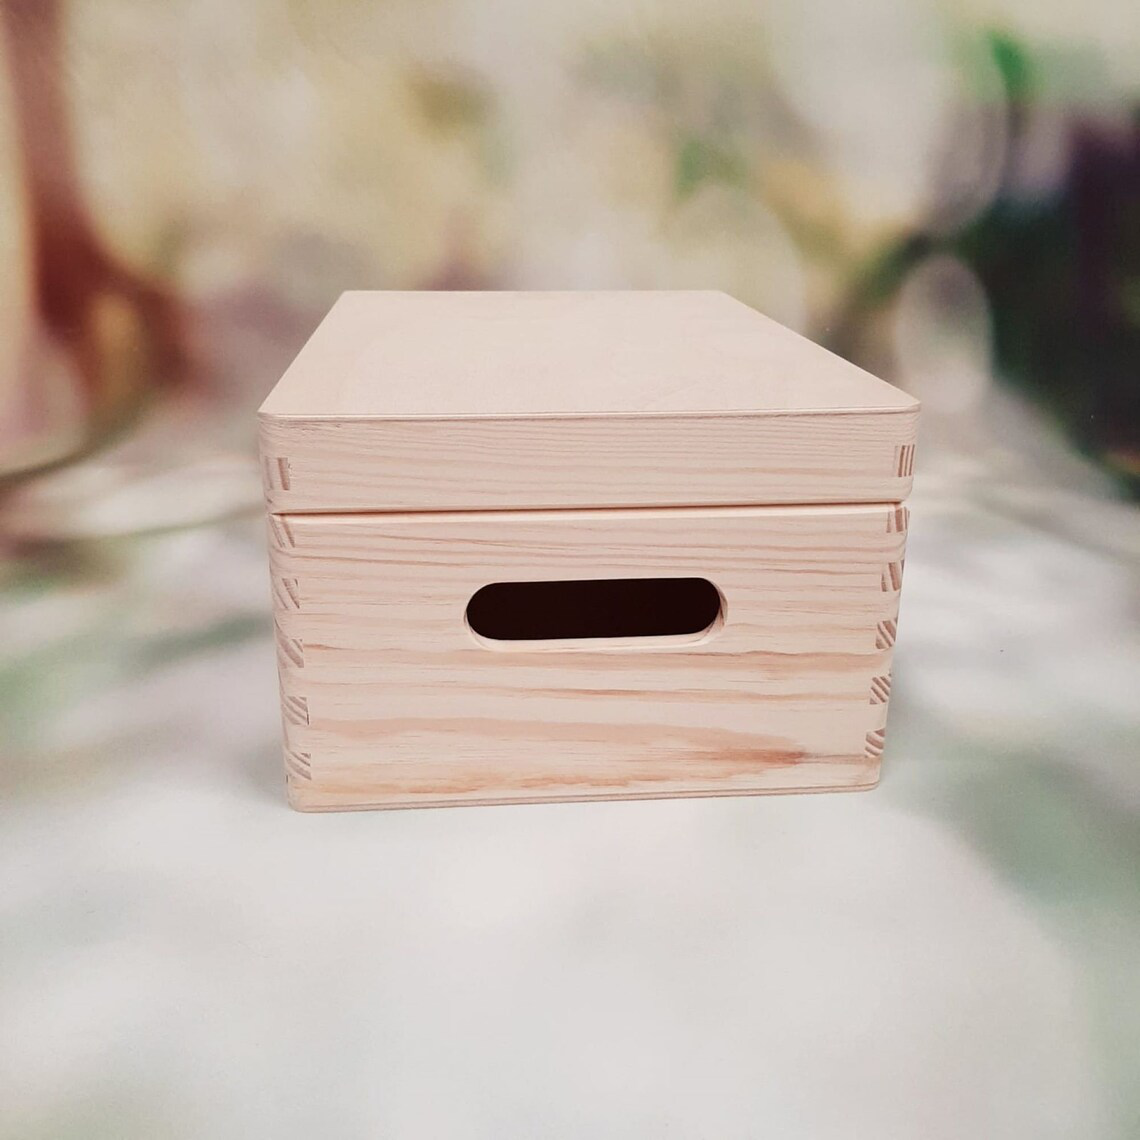 Plain Wooden Box With Or Without Handles - Handle Side View